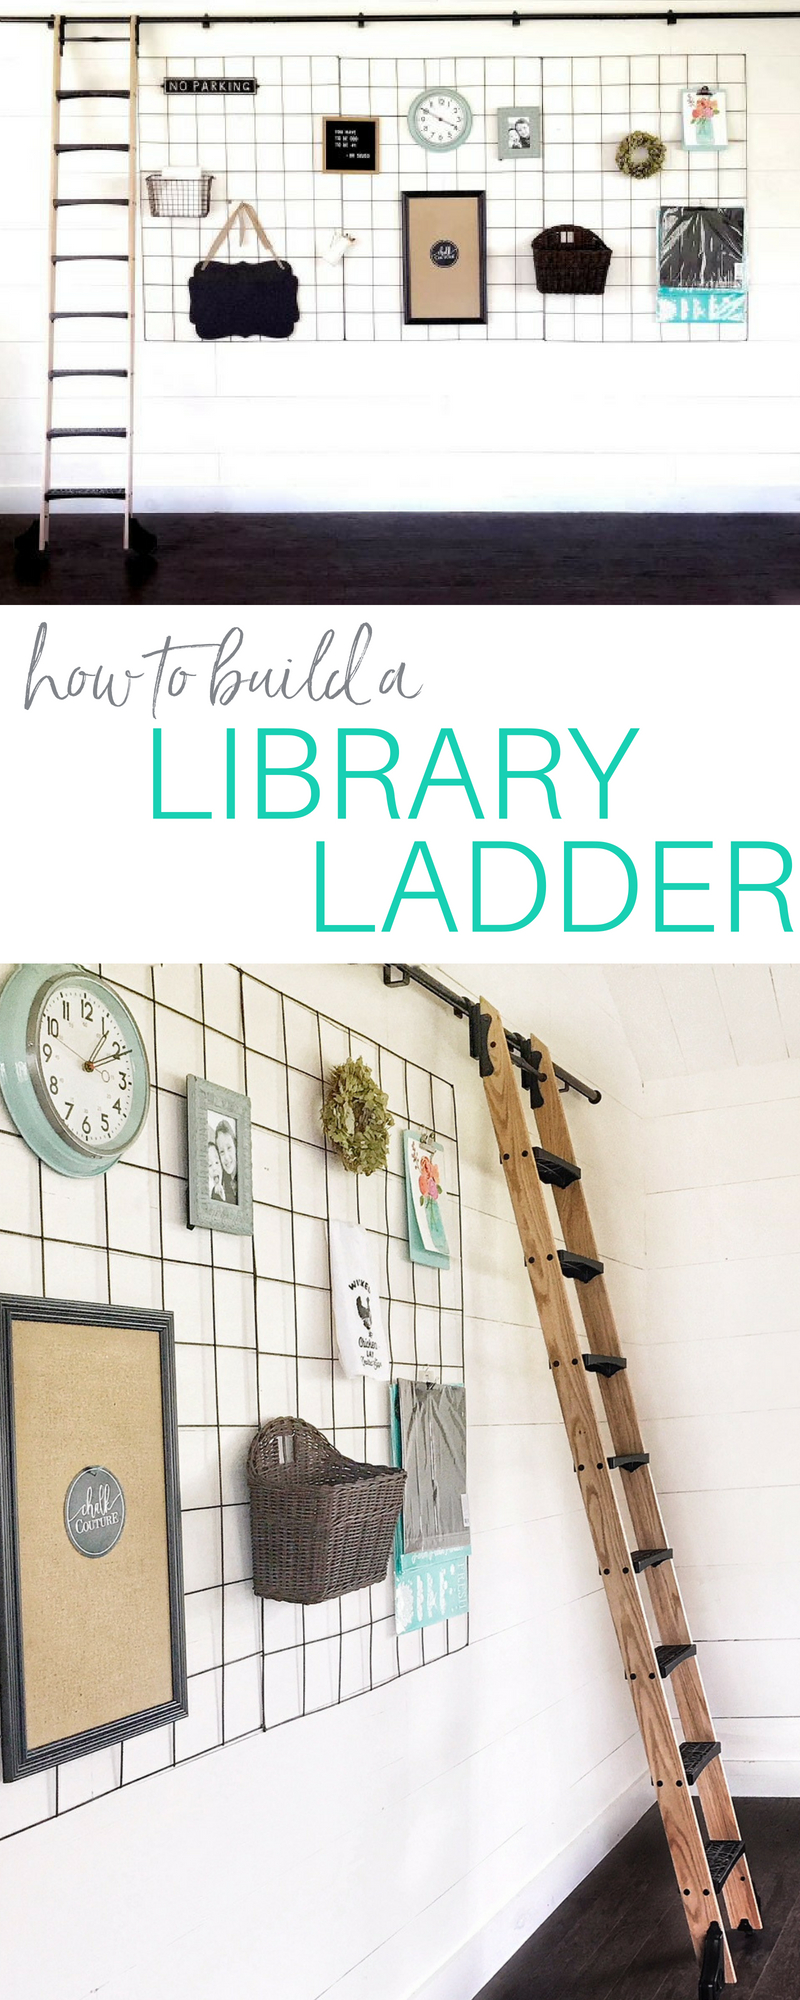 how to build a library ladder from start to finish - great step by step tutorial to show to how make the entire thing from start to finish with a video. I want a library ladder SO BAD!